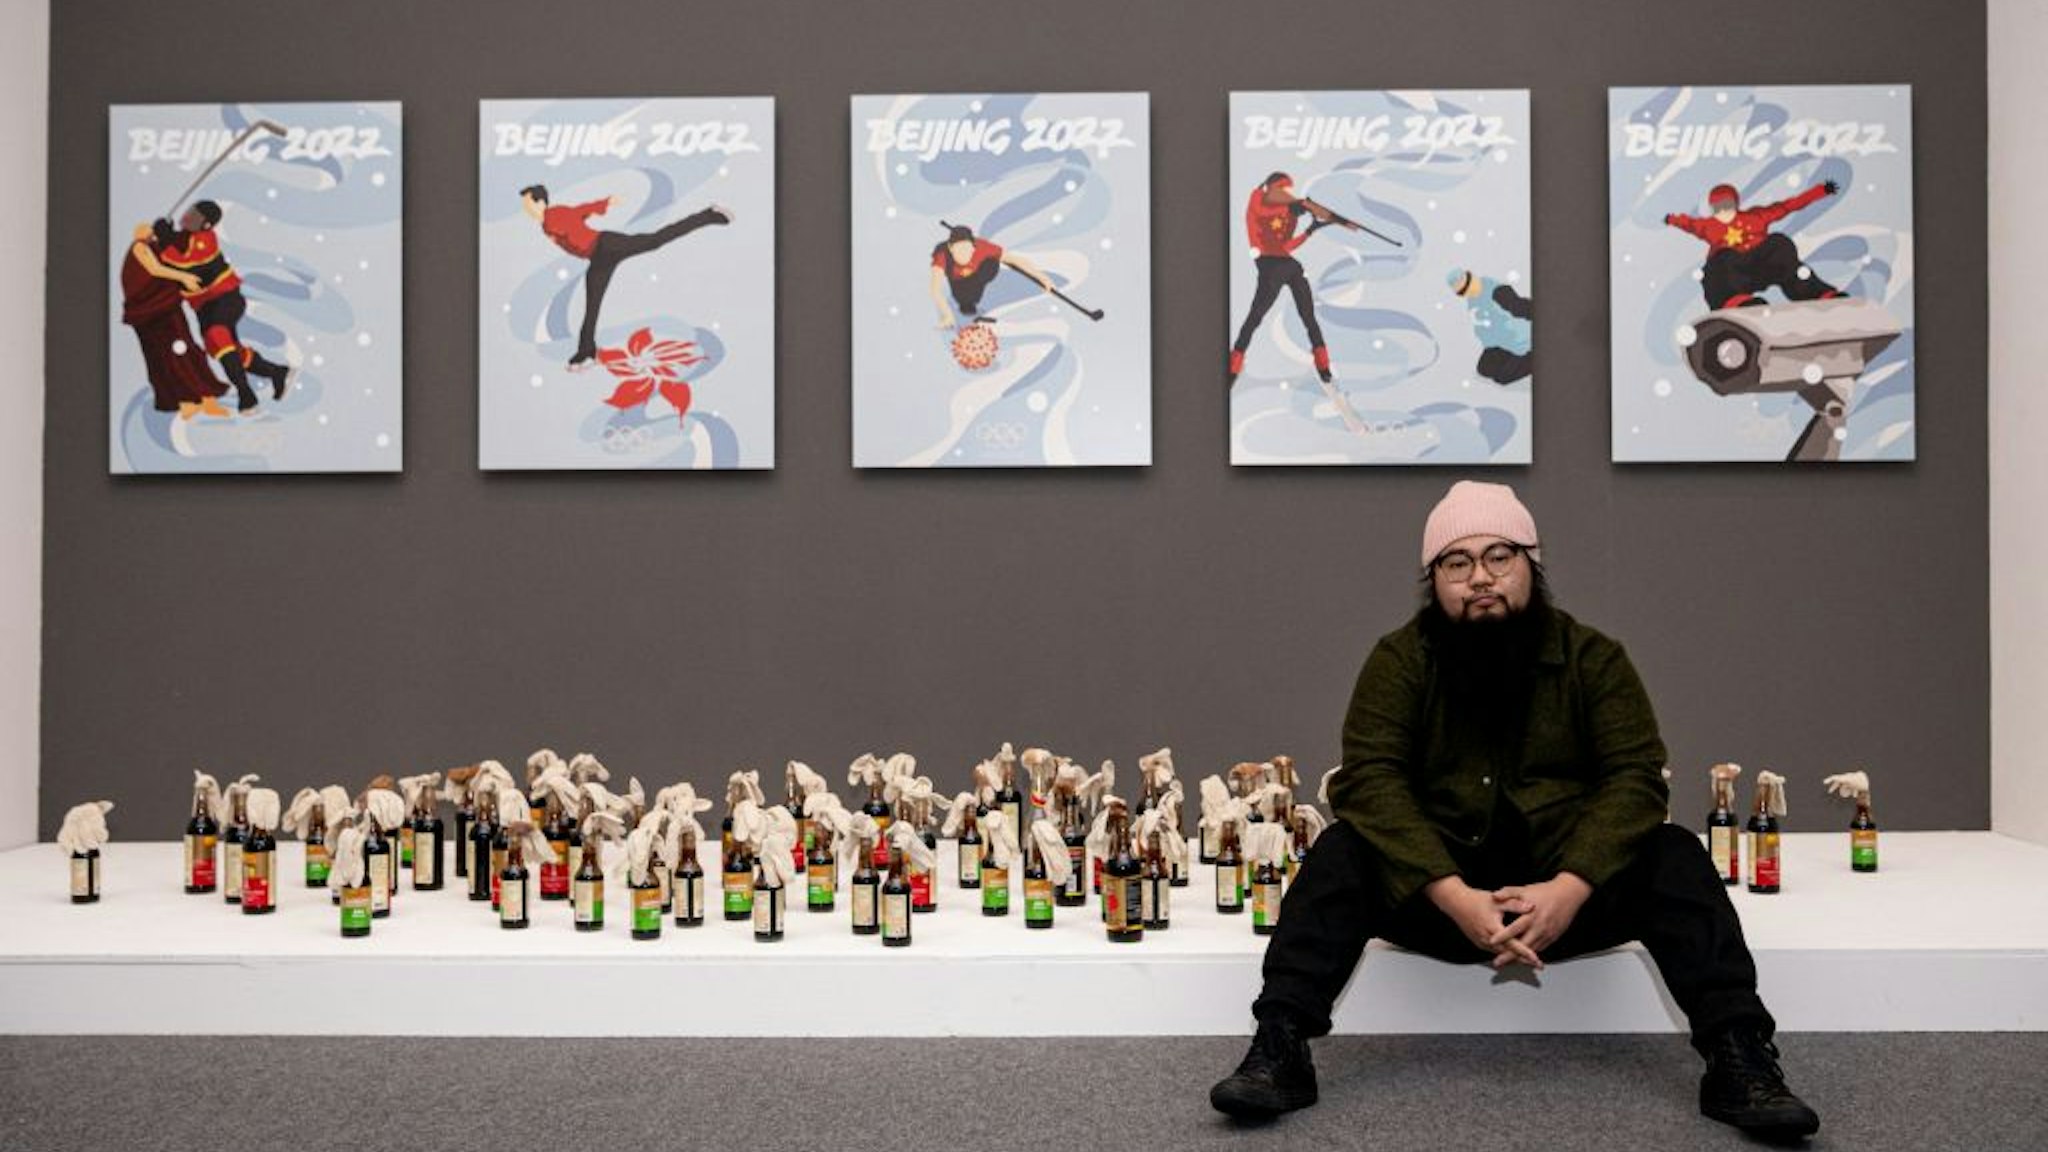 Chinese dissident artist Badiucao poses next to his artwork series inspired by the upcoming 2022 Winter Olympic Games in Beijing, on November 12, 2021 at the exhibition "China is (not) near -- works of a dissident artist", opening at the Santa Giulia museum in Brescia, Lombardy.